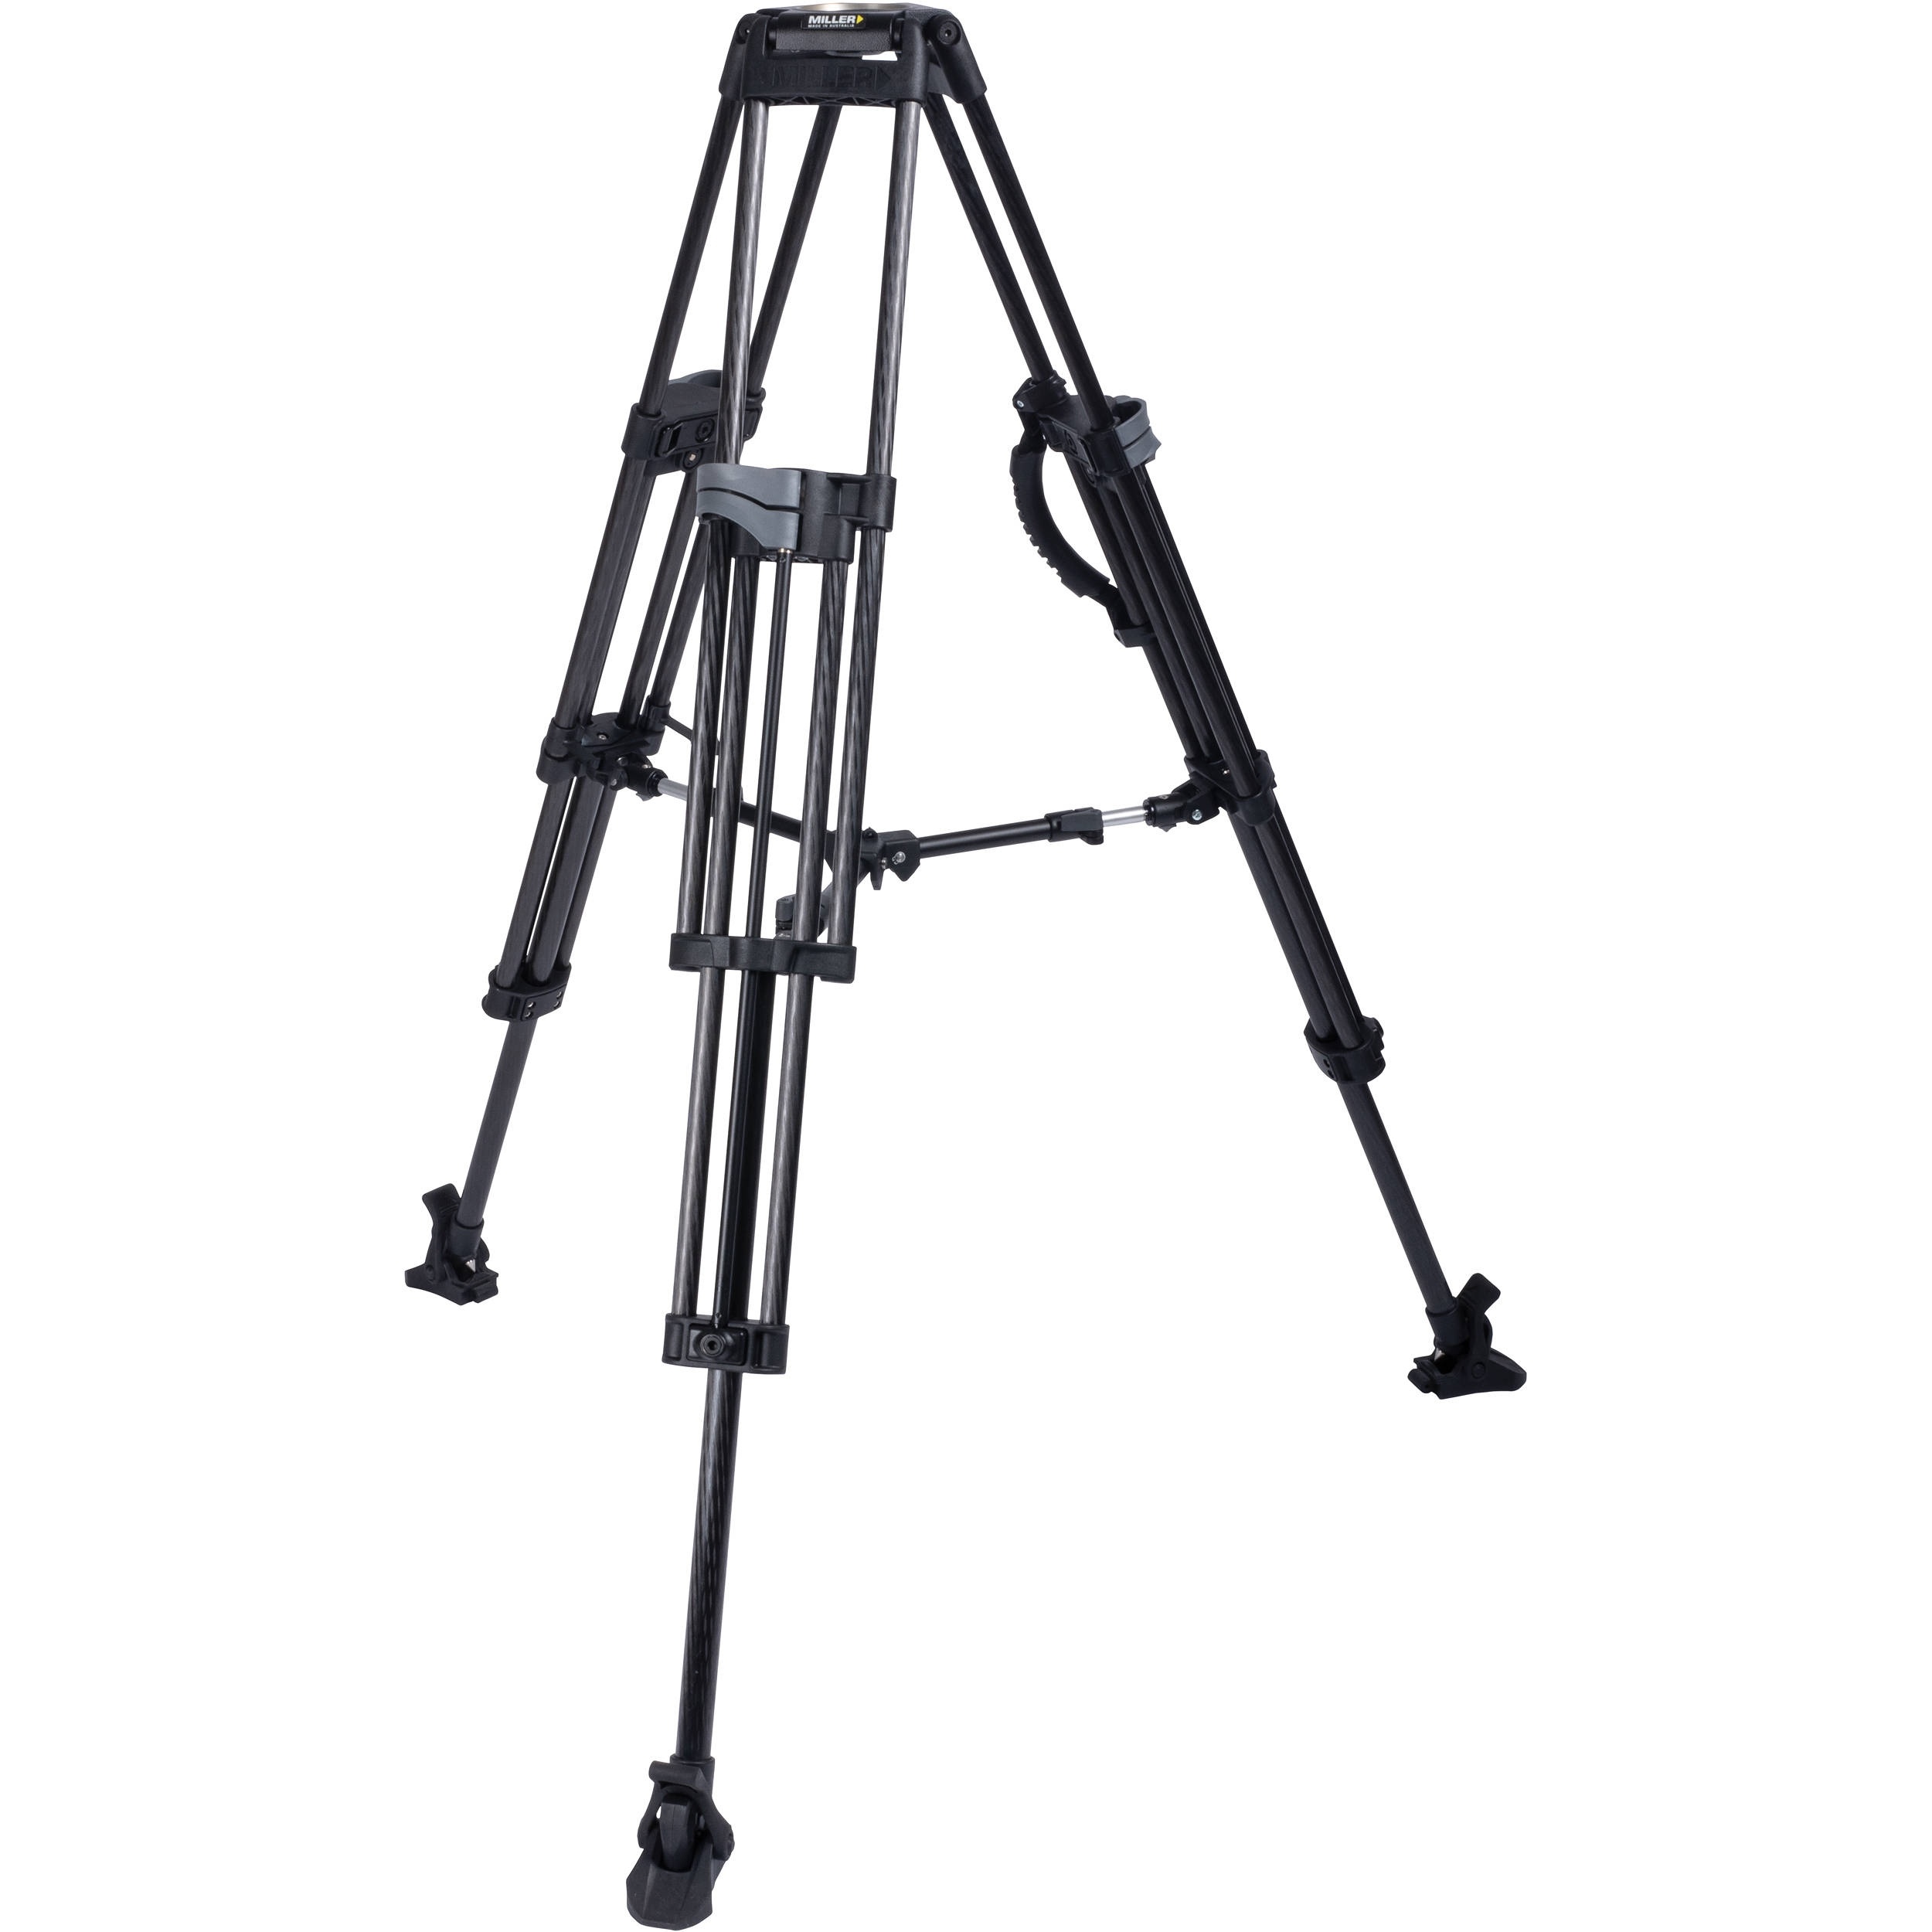 Miller 75 Sprinter II 2-St Carbon Fibre Tripod with Mid-Level Spreader (593) and Feet (475)